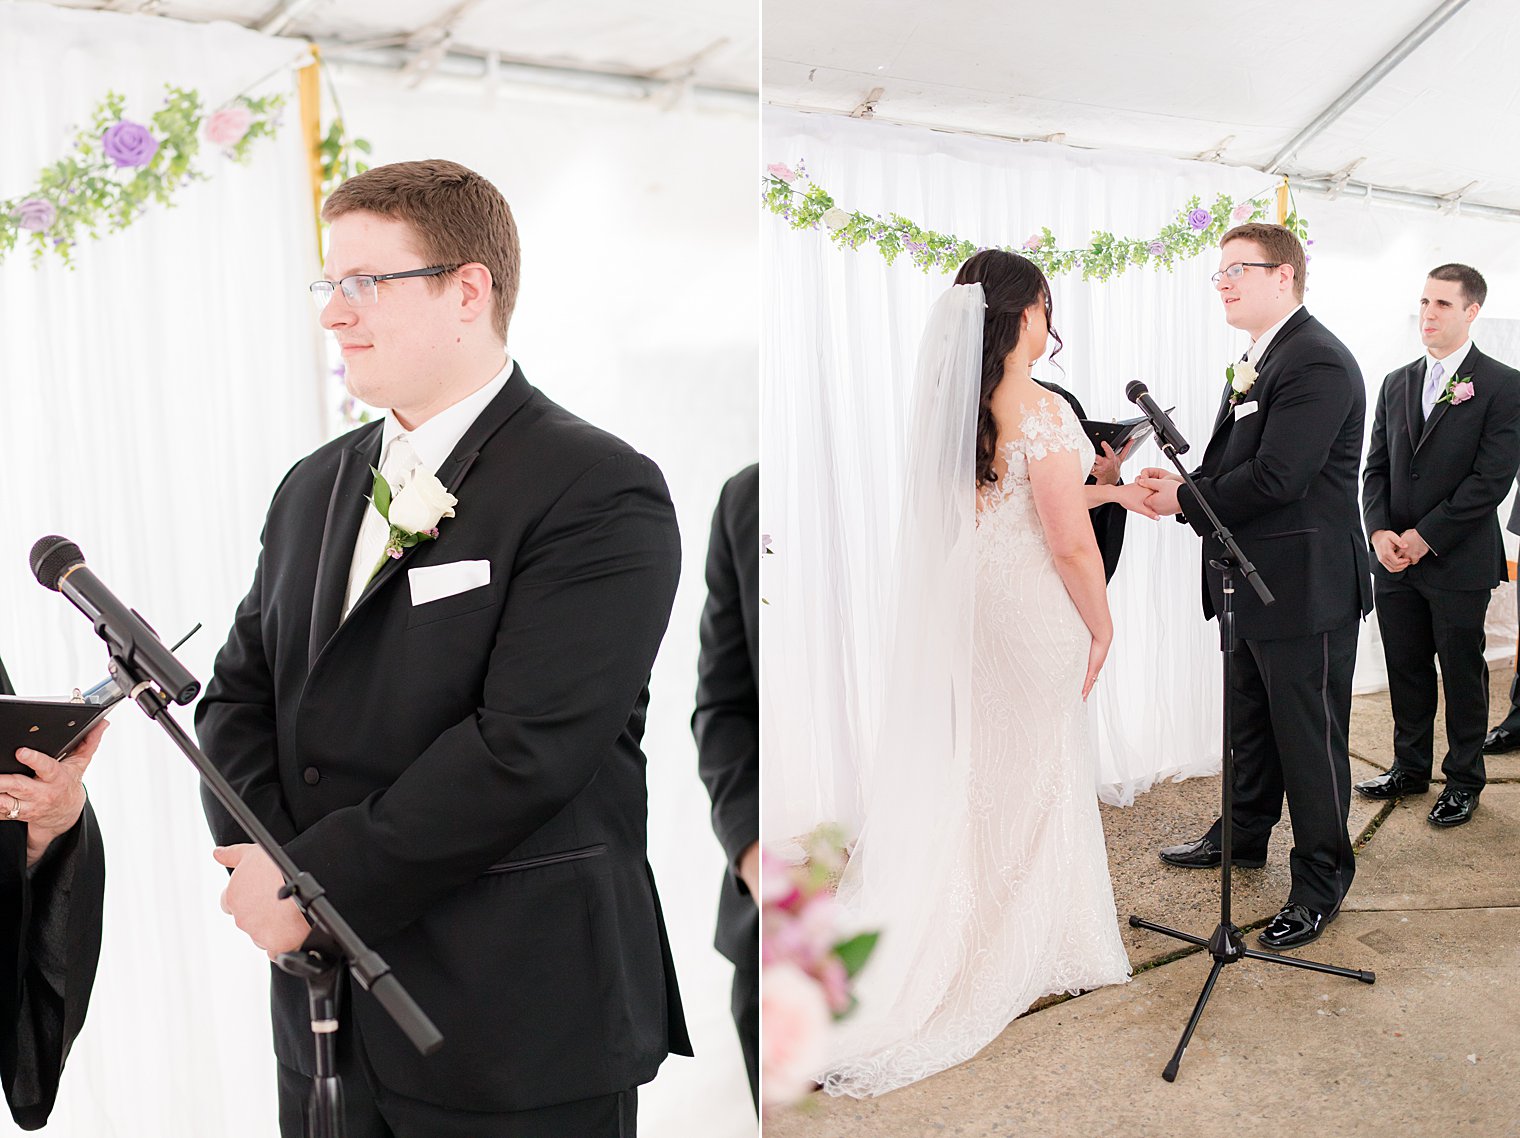 bride and groom exchange vows during tented wedding ceremony in backyard